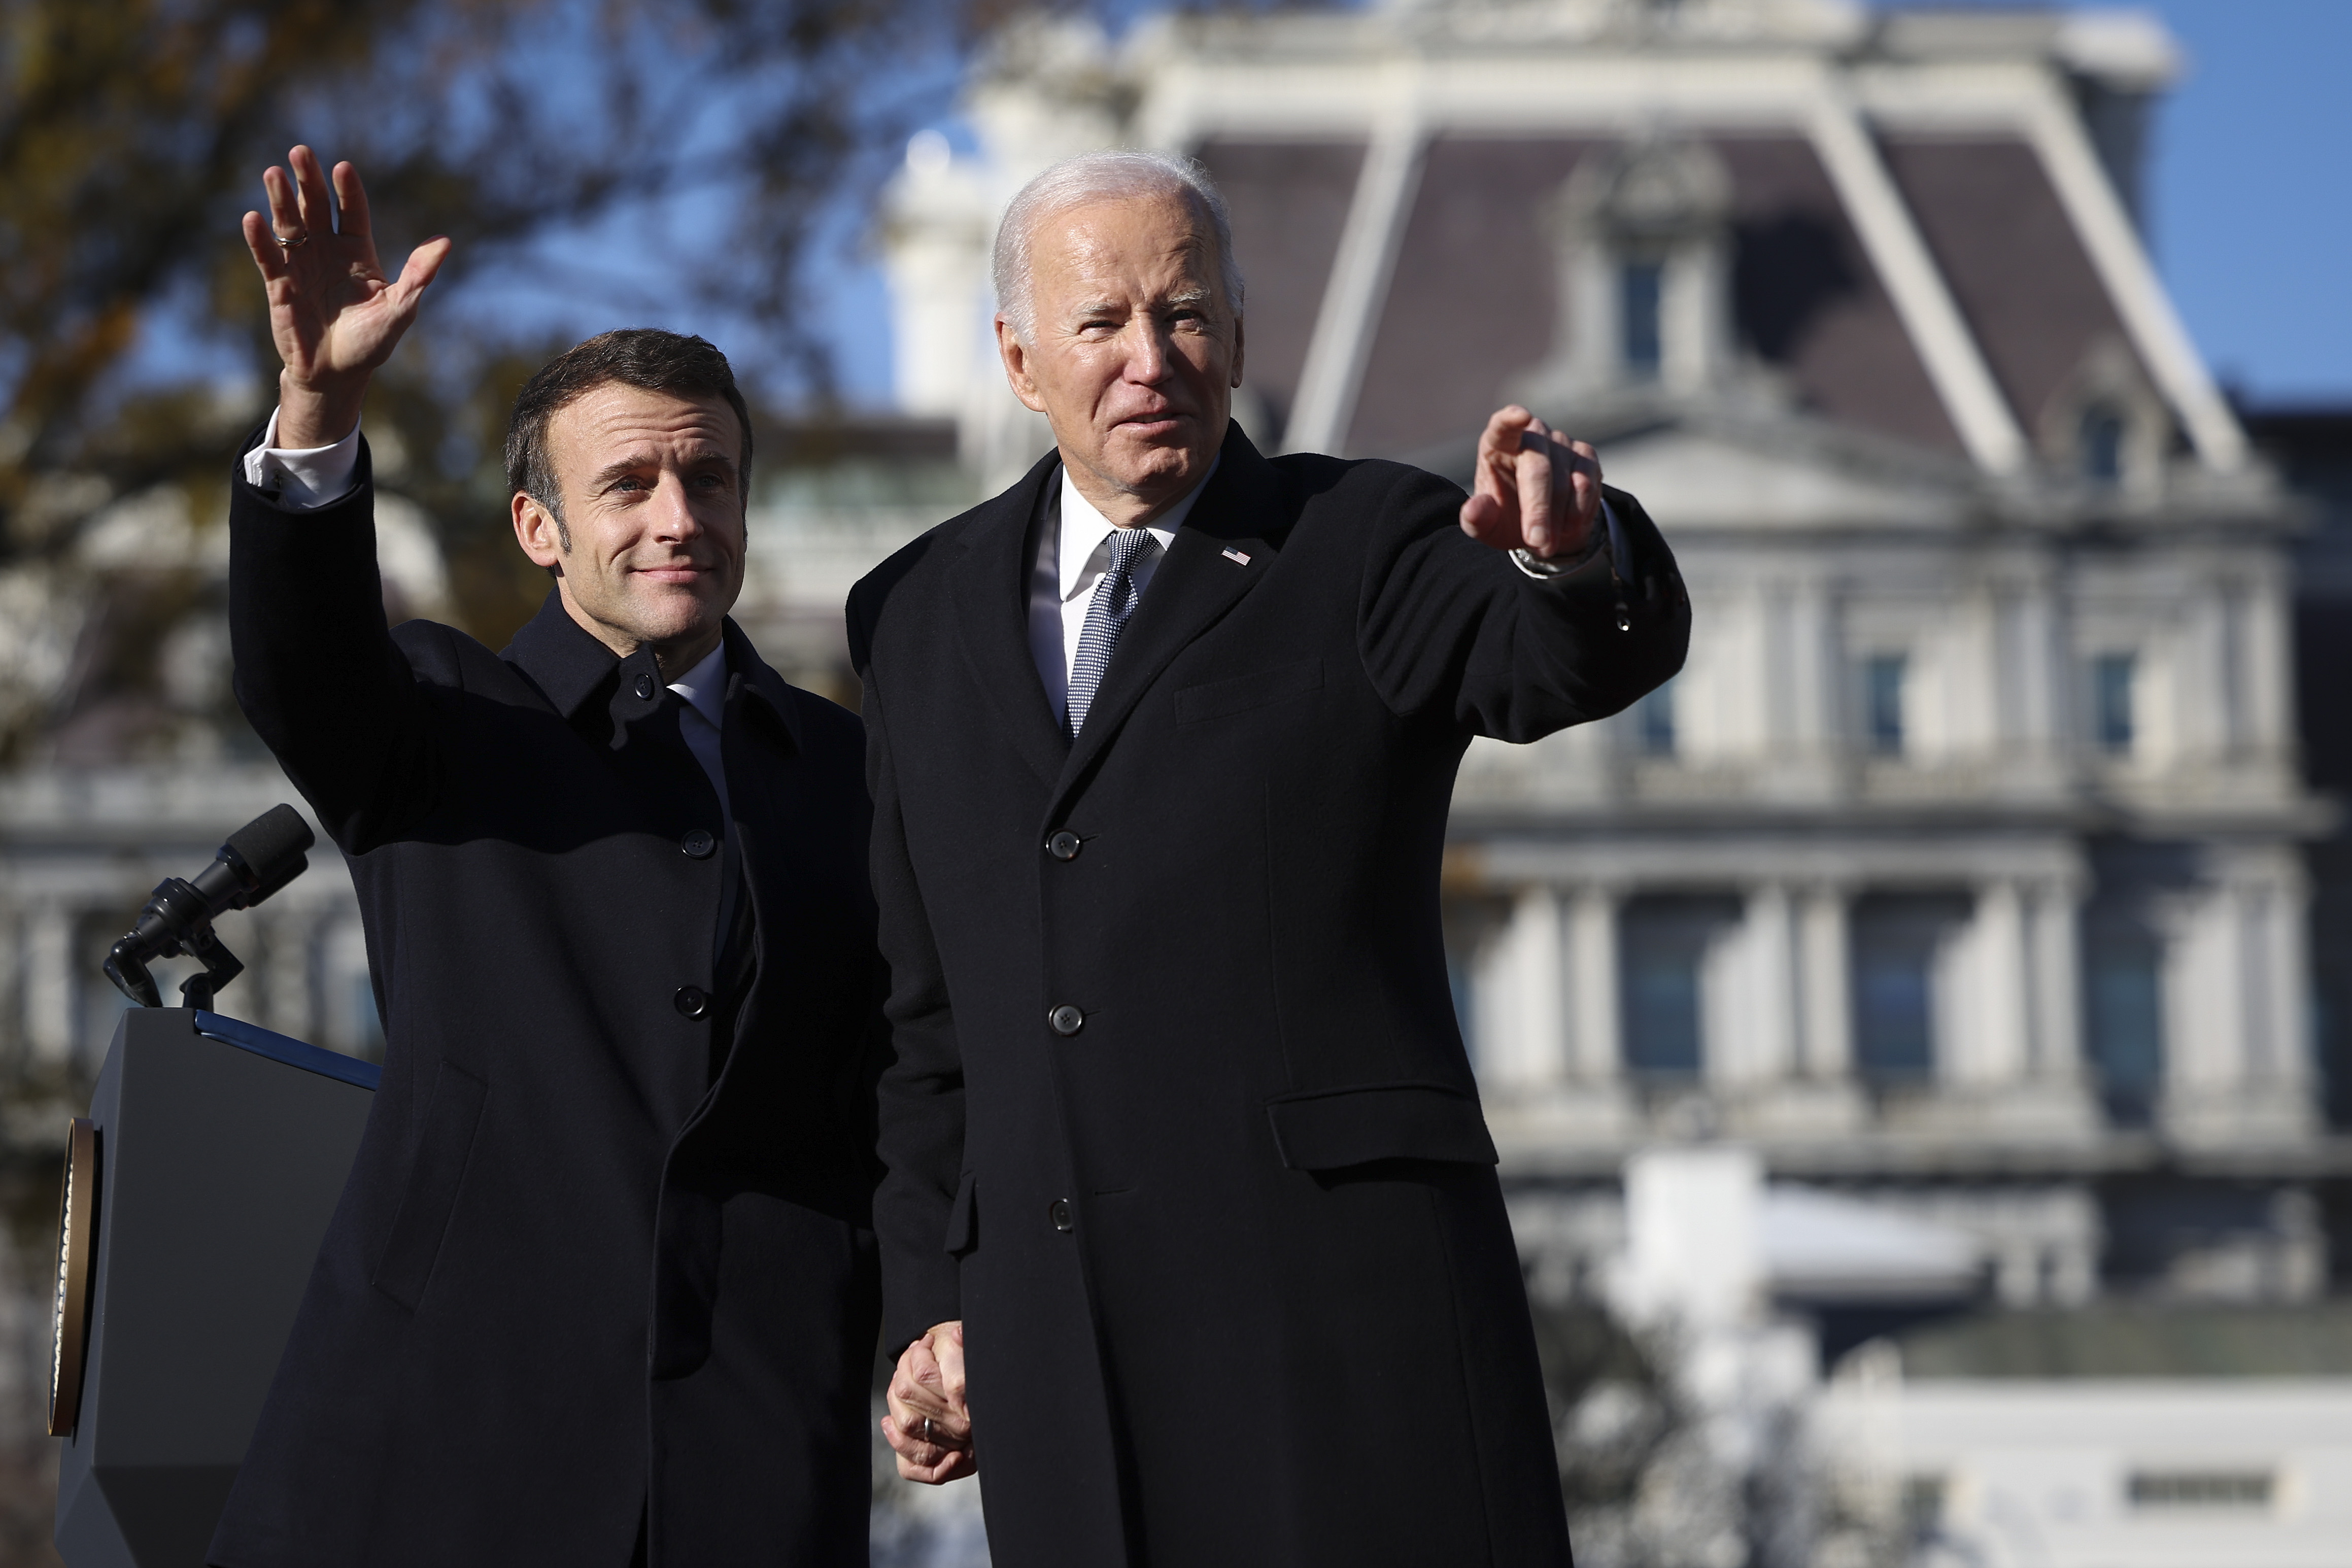 LIVE 11:45 AM ET: Biden, Macron Hold a Joint News Conference at White House